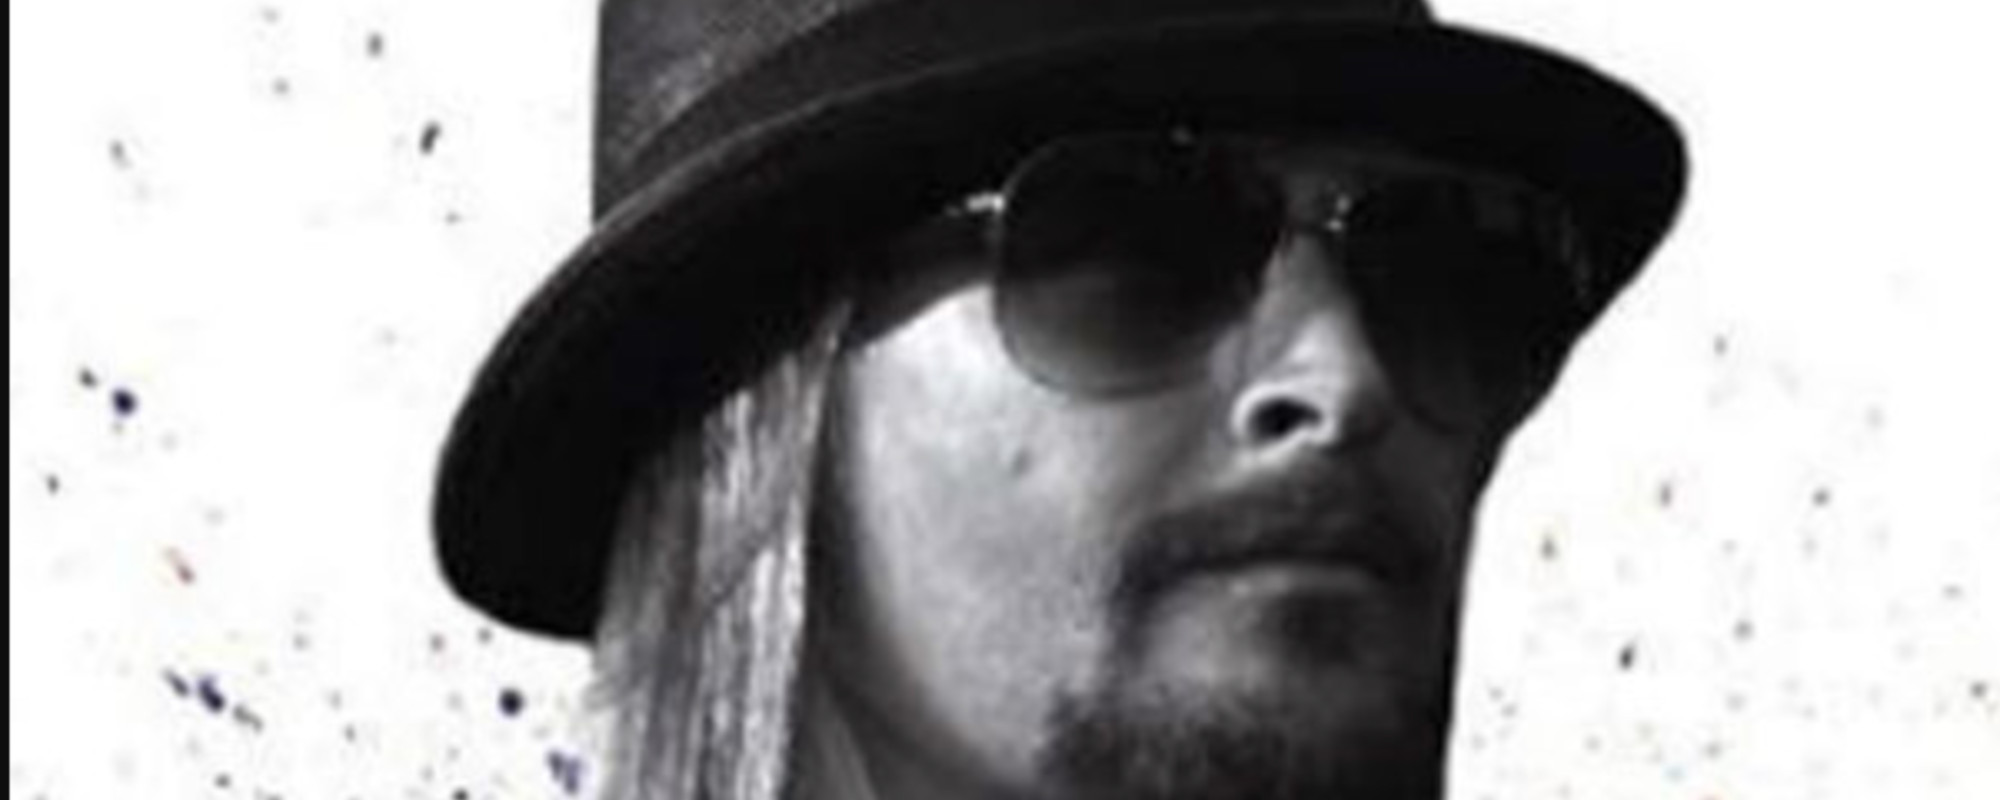 In Fox News Interview, Kid Rock Doesn’t Rule Out Running for Office